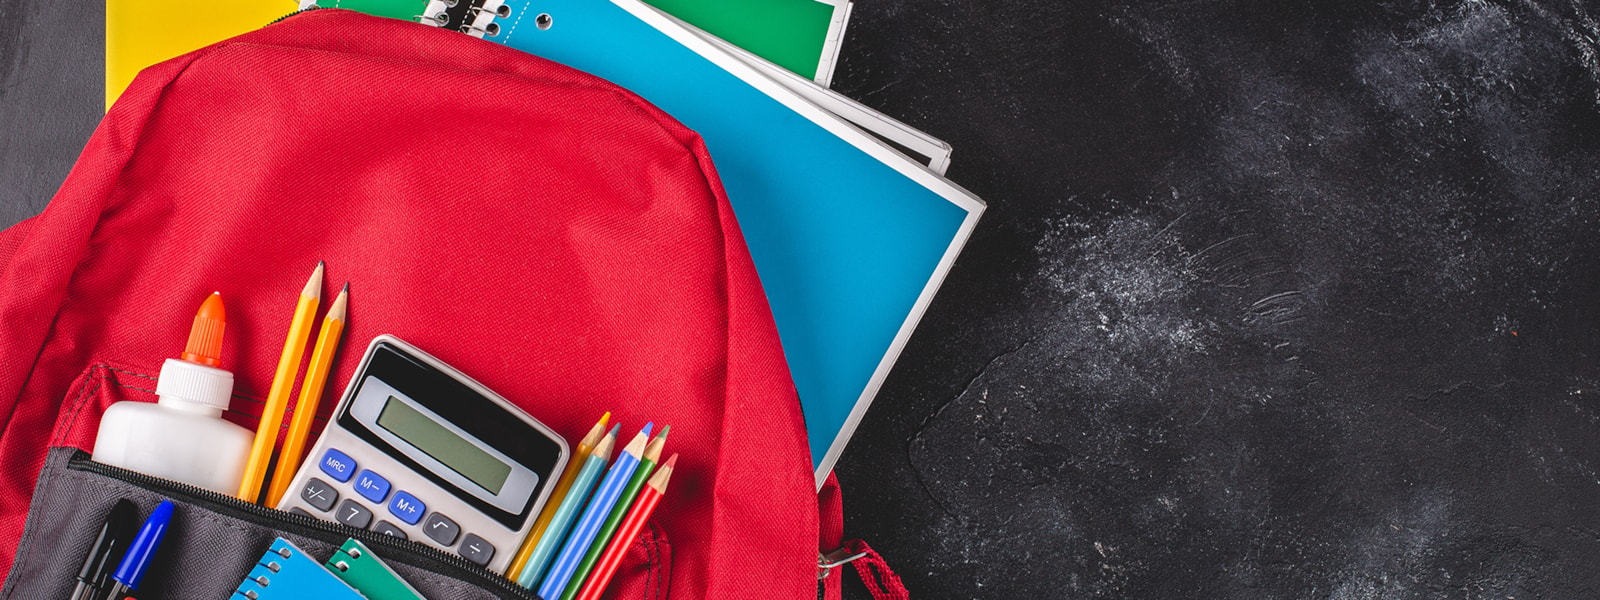 Red backpack with calculator, notebooks, pencils, and a glue bottle